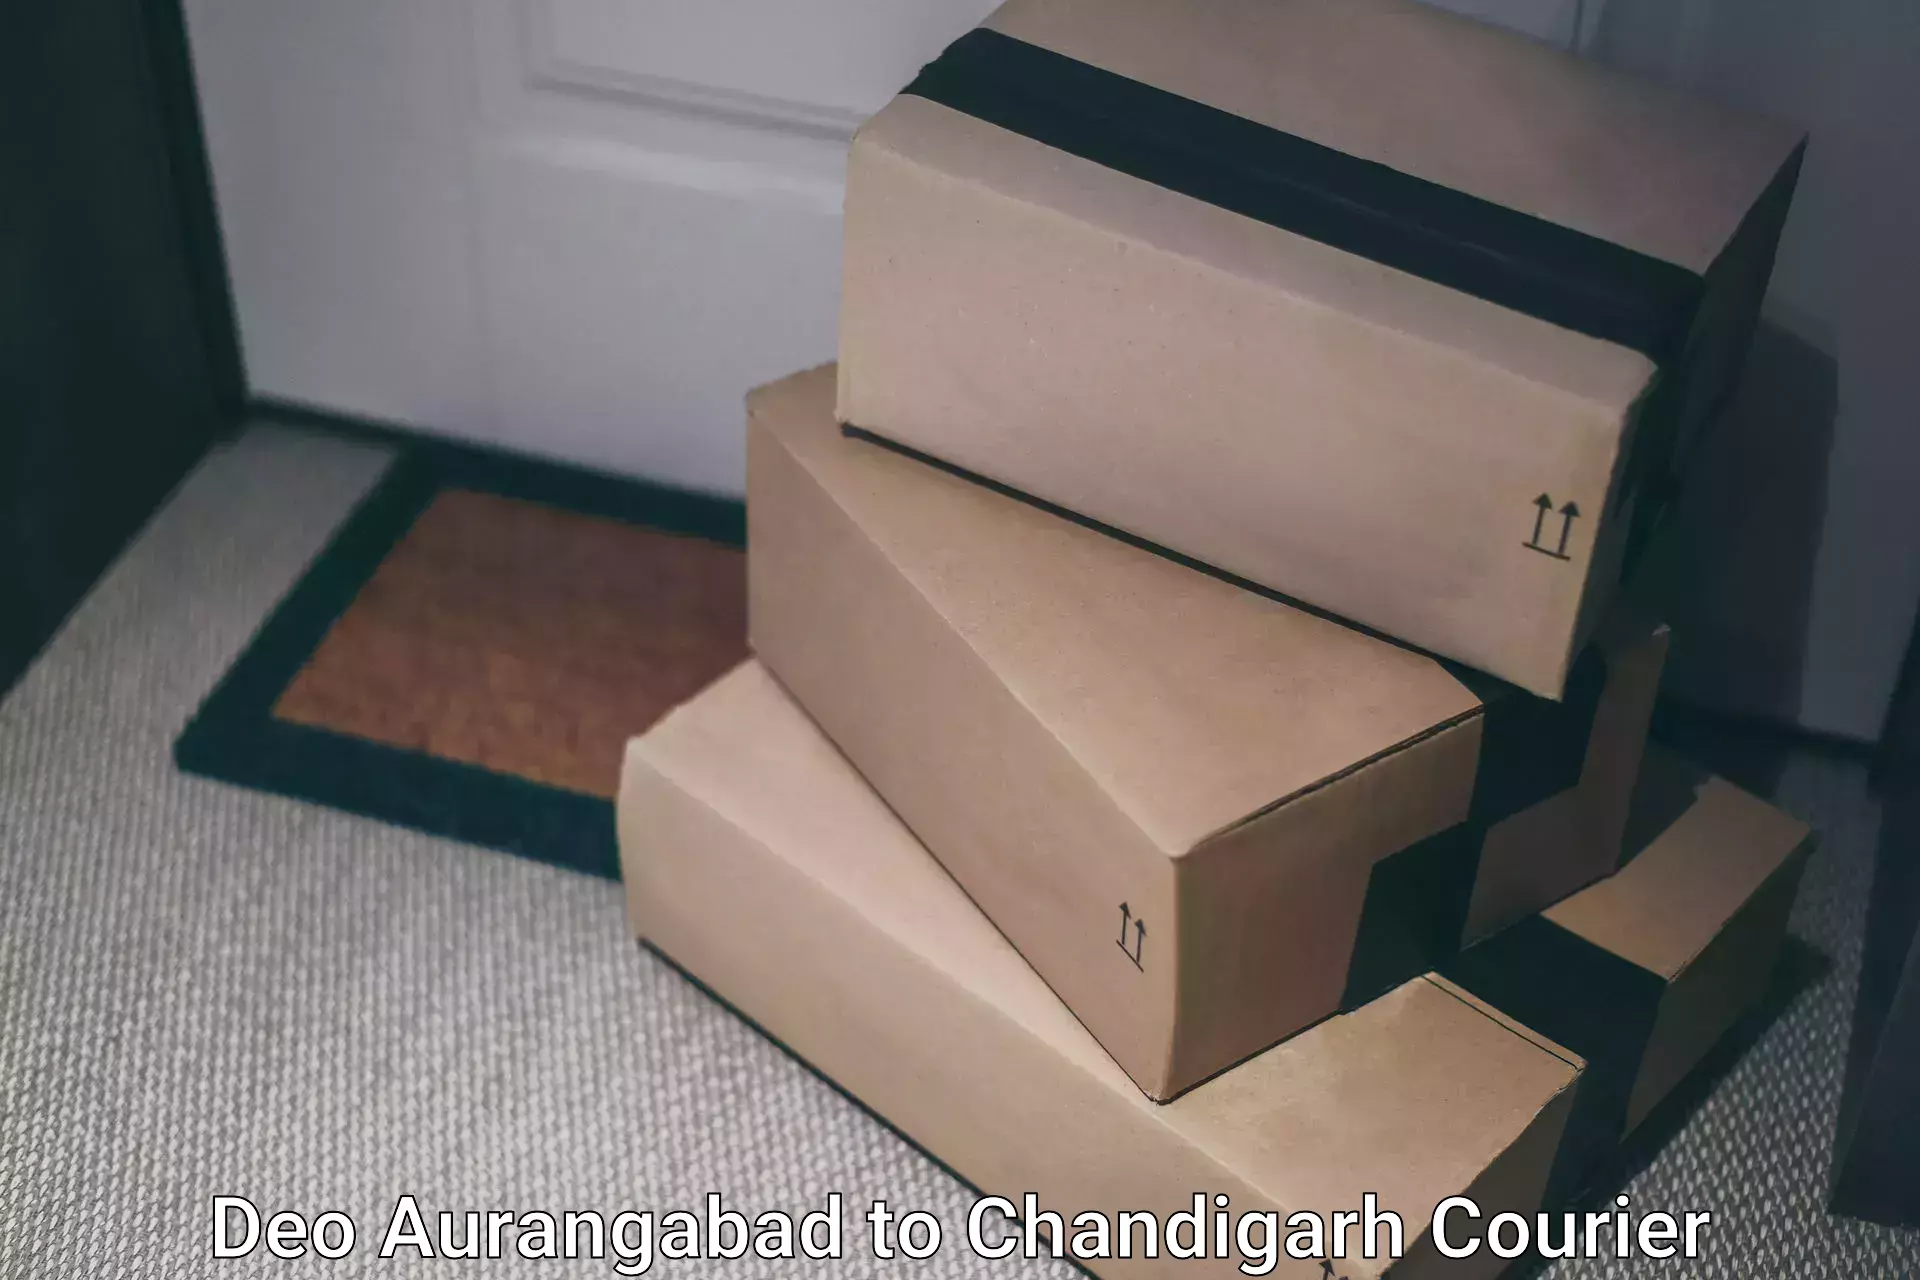 Express delivery capabilities Deo Aurangabad to Chandigarh